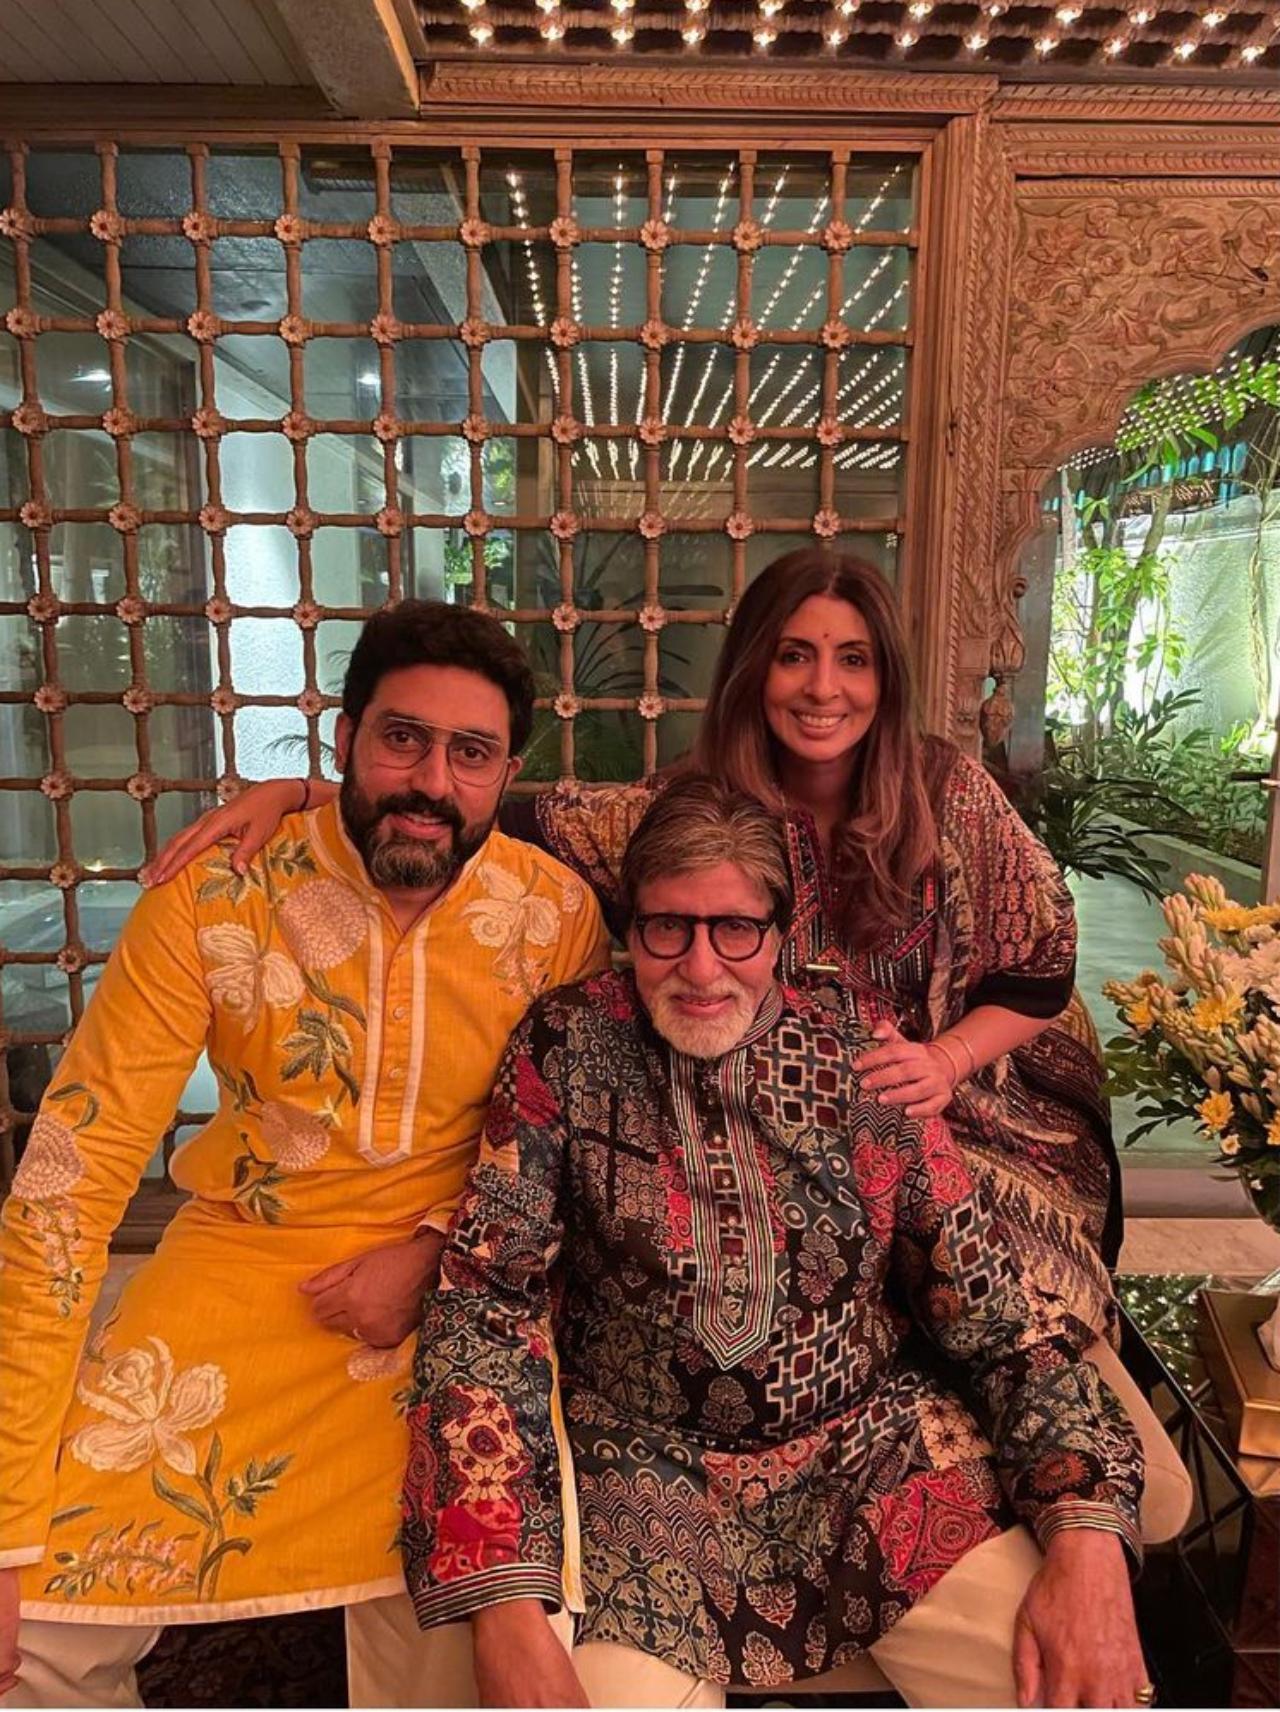 Meanwhile, on the film front, Amitabh was recently seen in director Vikas Behl's family entertainer film 'Goodbye' alongside Rashmika Mandanna and Neena Gupta. The film received positive responses from the audience. He will be next seen in director Sooraj Barjataya's upcoming family entertainer film 'Uunchai' along with Anupam Kher, Boman Irani and Parineeti Chopra